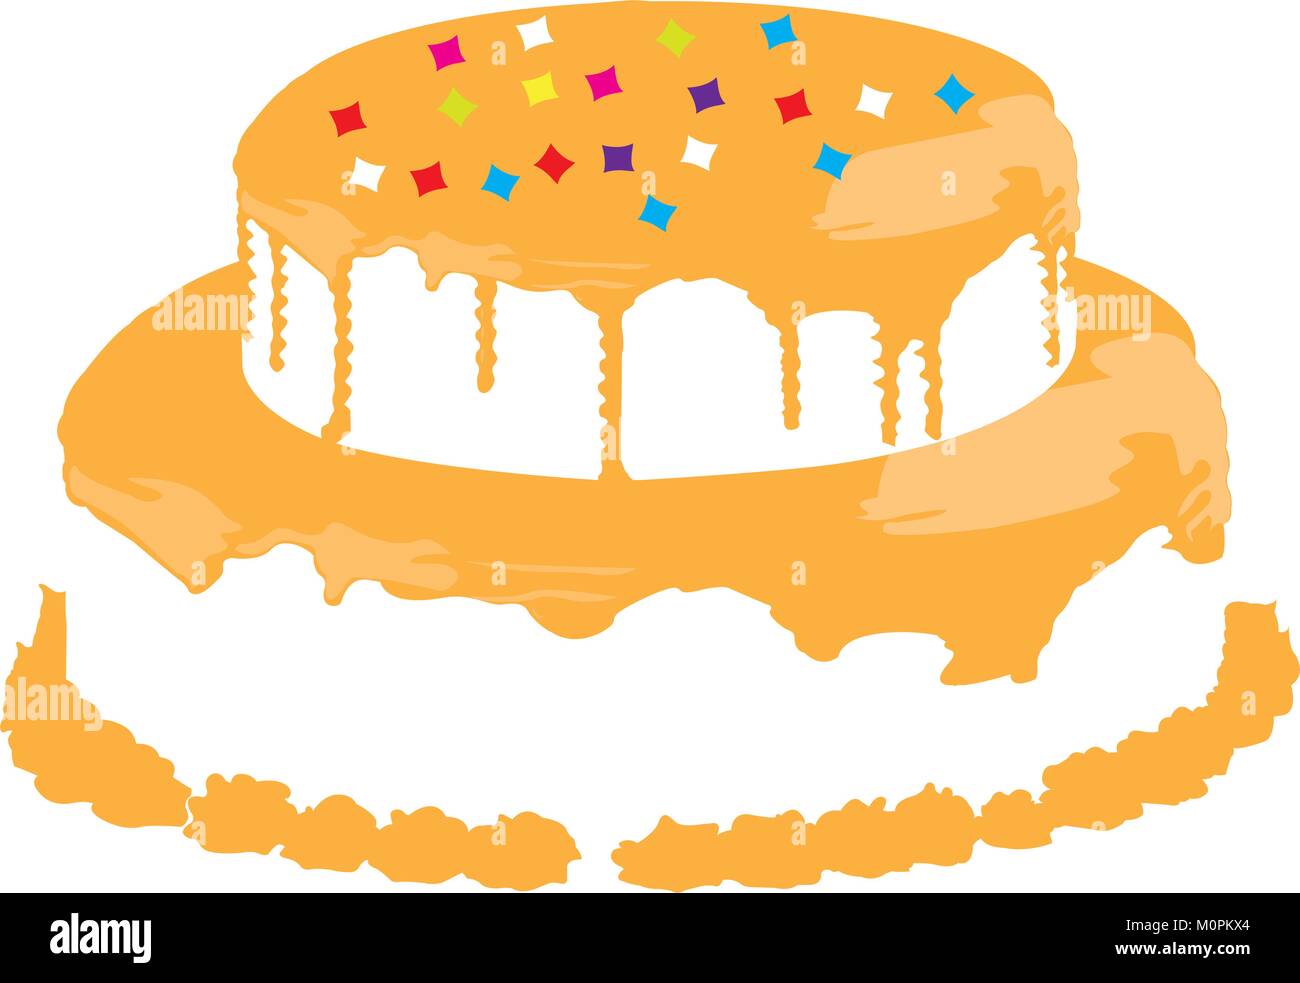 Isolated cake illustration Stock Vector